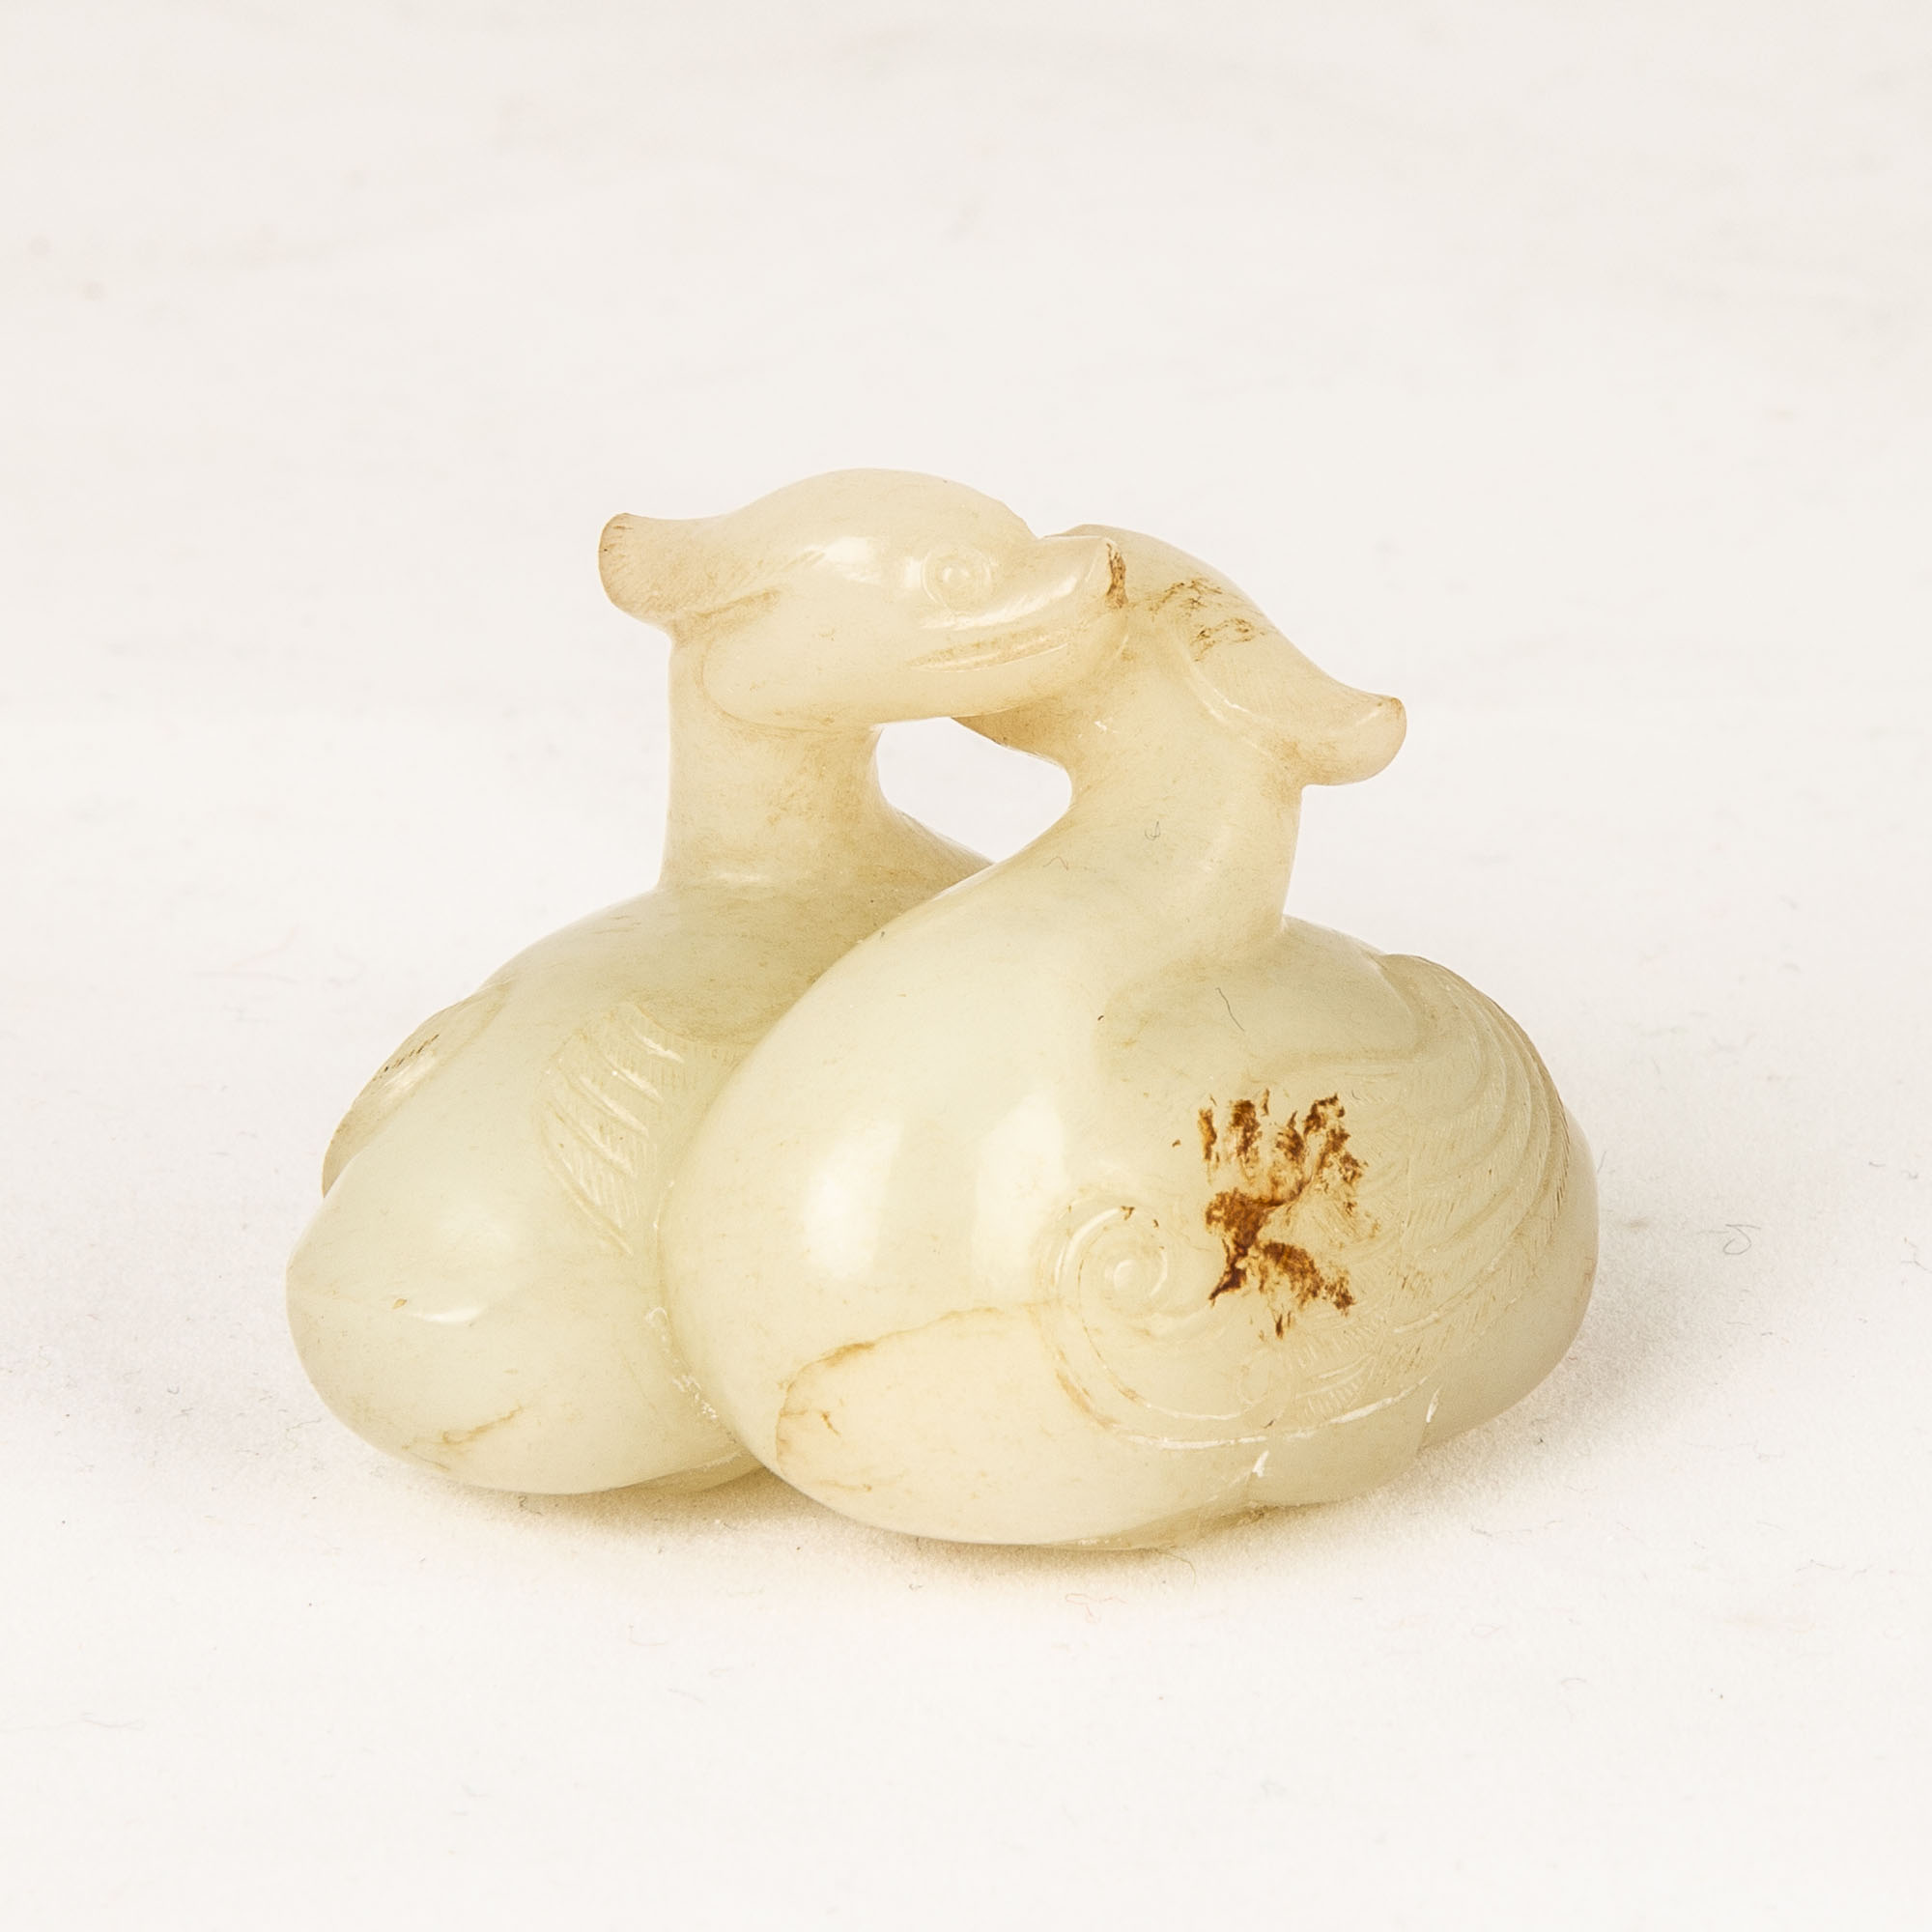 Chinese Carved Jade Ducks - Image 2 of 3